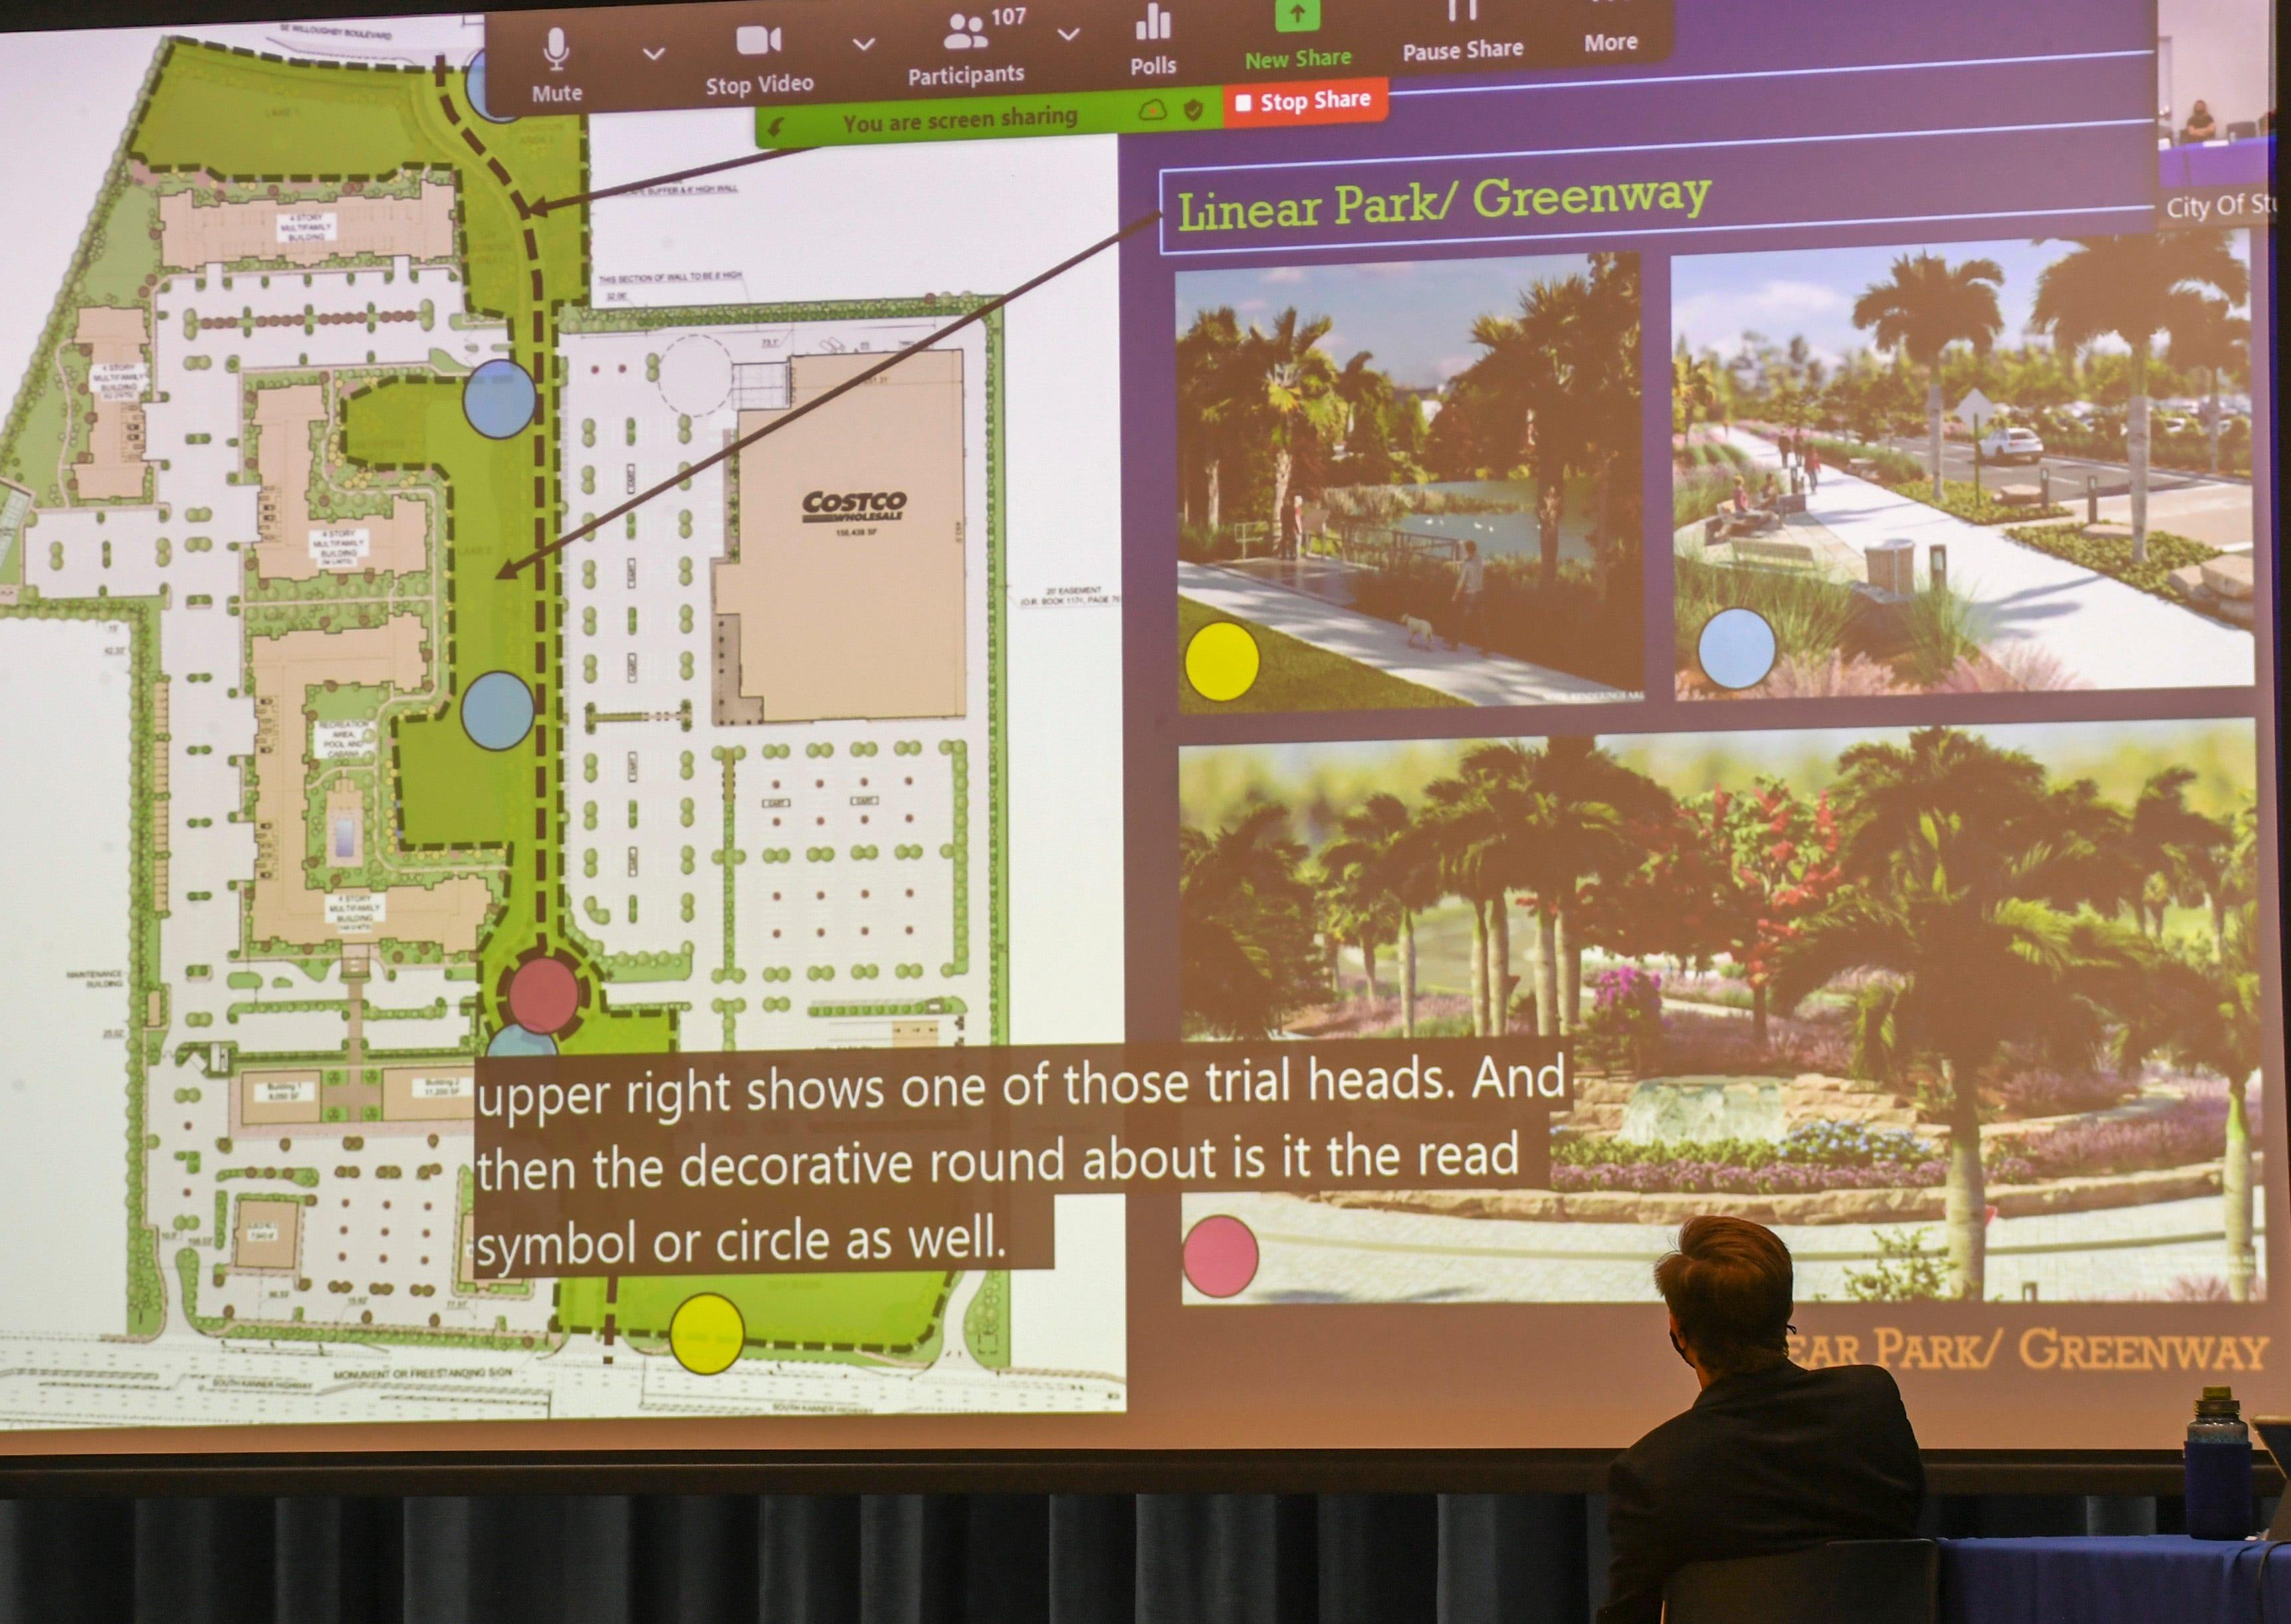 City of Stuart Vice Mayor Merritt Matheson (bottom right) is seen overlooking one of the slides showing the location and features of the proposed Costco site off South Kanner Highway during the developer’s presentation to the Stuart City Commission about a proposed Costco location on Monday, Aug. 9, 2021, in Stuart. The commission approved the build after an eight-hour meeting.